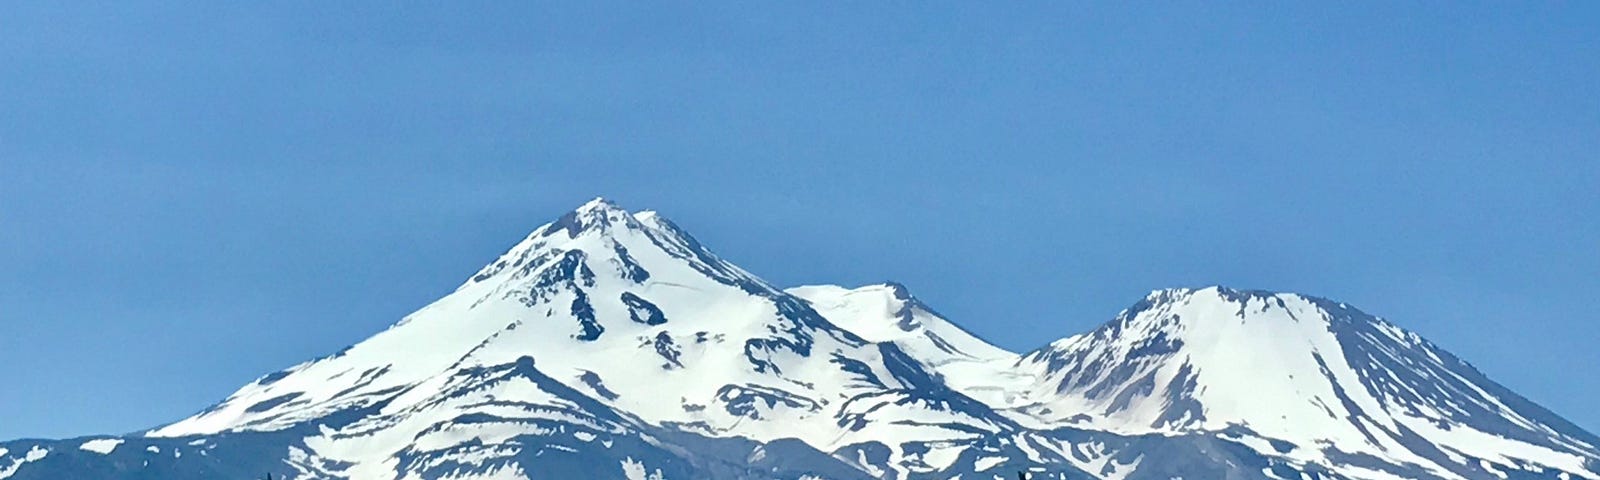 Mount Shasta, picture taken by the author from the vista point.